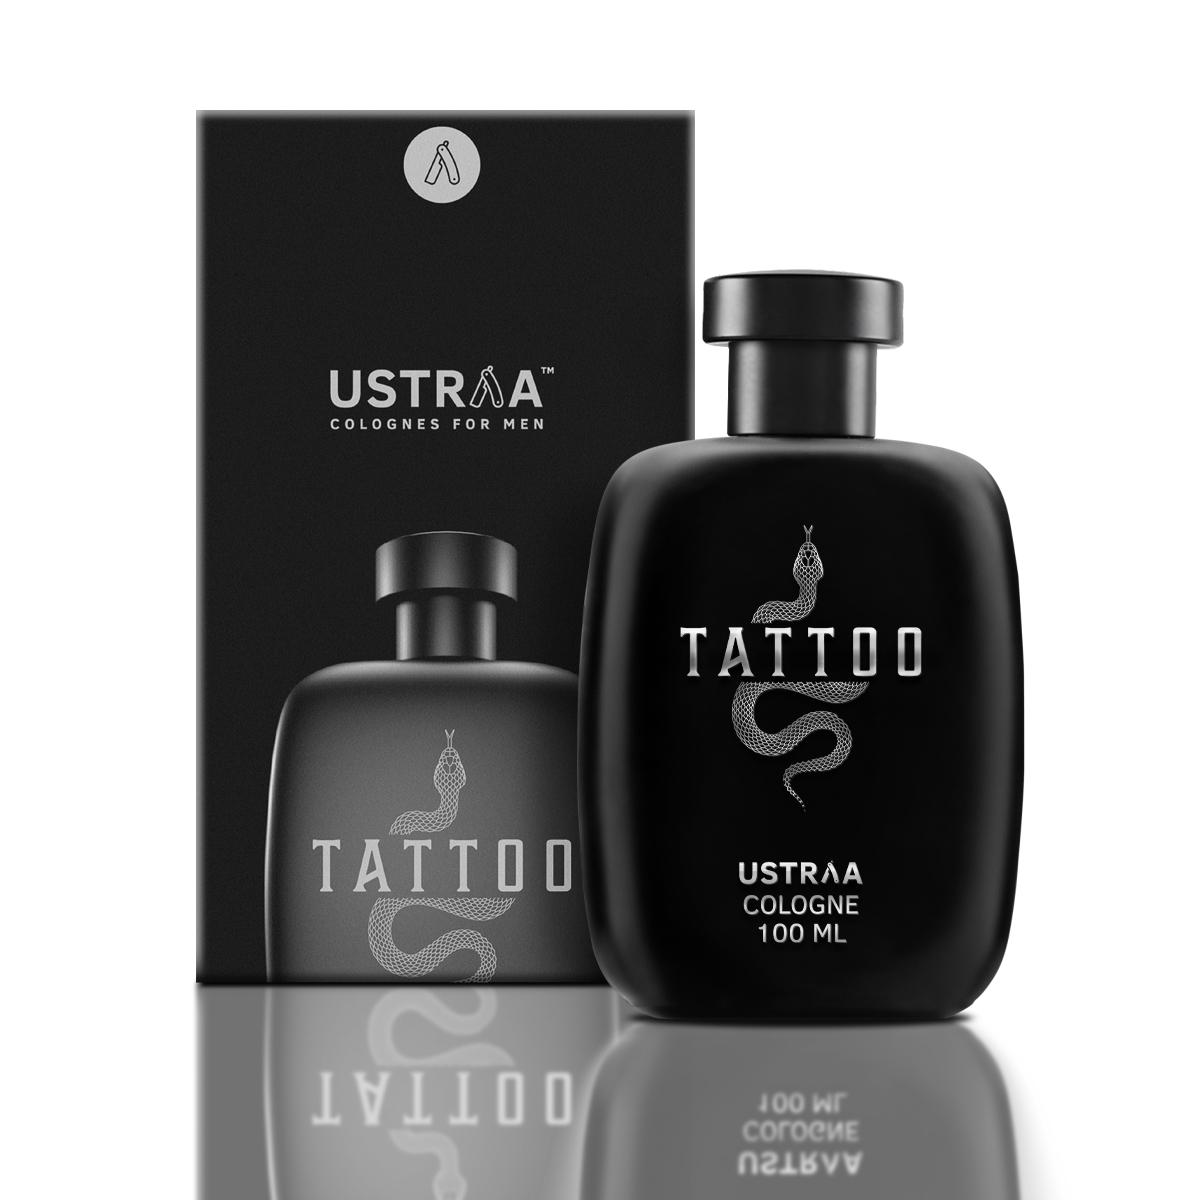 Ustraa Tattoo Cologne Perfume for Men - 100 ml - An Edgy and Long Lasting Fragrance for All Day Use